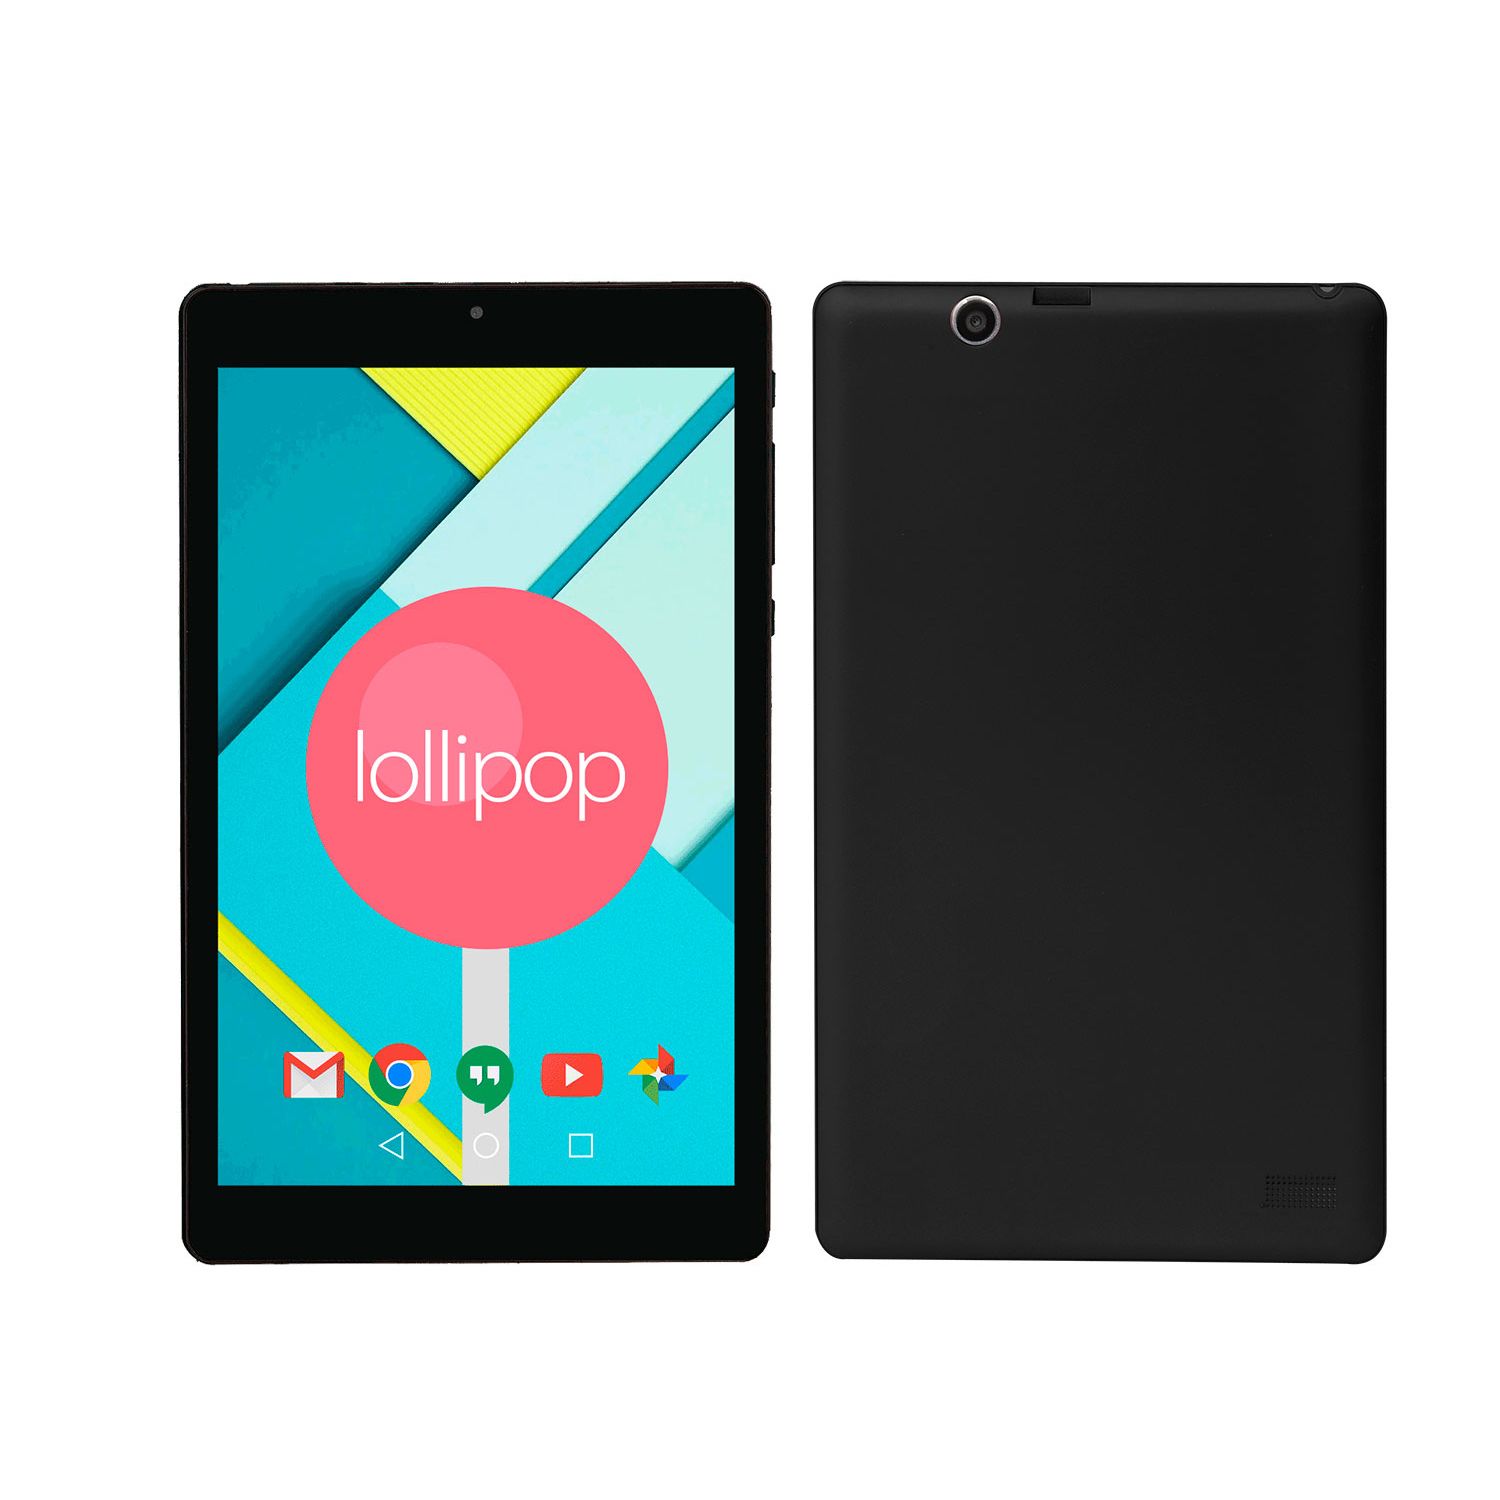 Nextbook Ares 8 - Tablet - Android 5.0 (Lollipop) - 16 GB eMMC - 8" IPS (1280 x 800) - USB host - microSD slot - black - image 5 of 5